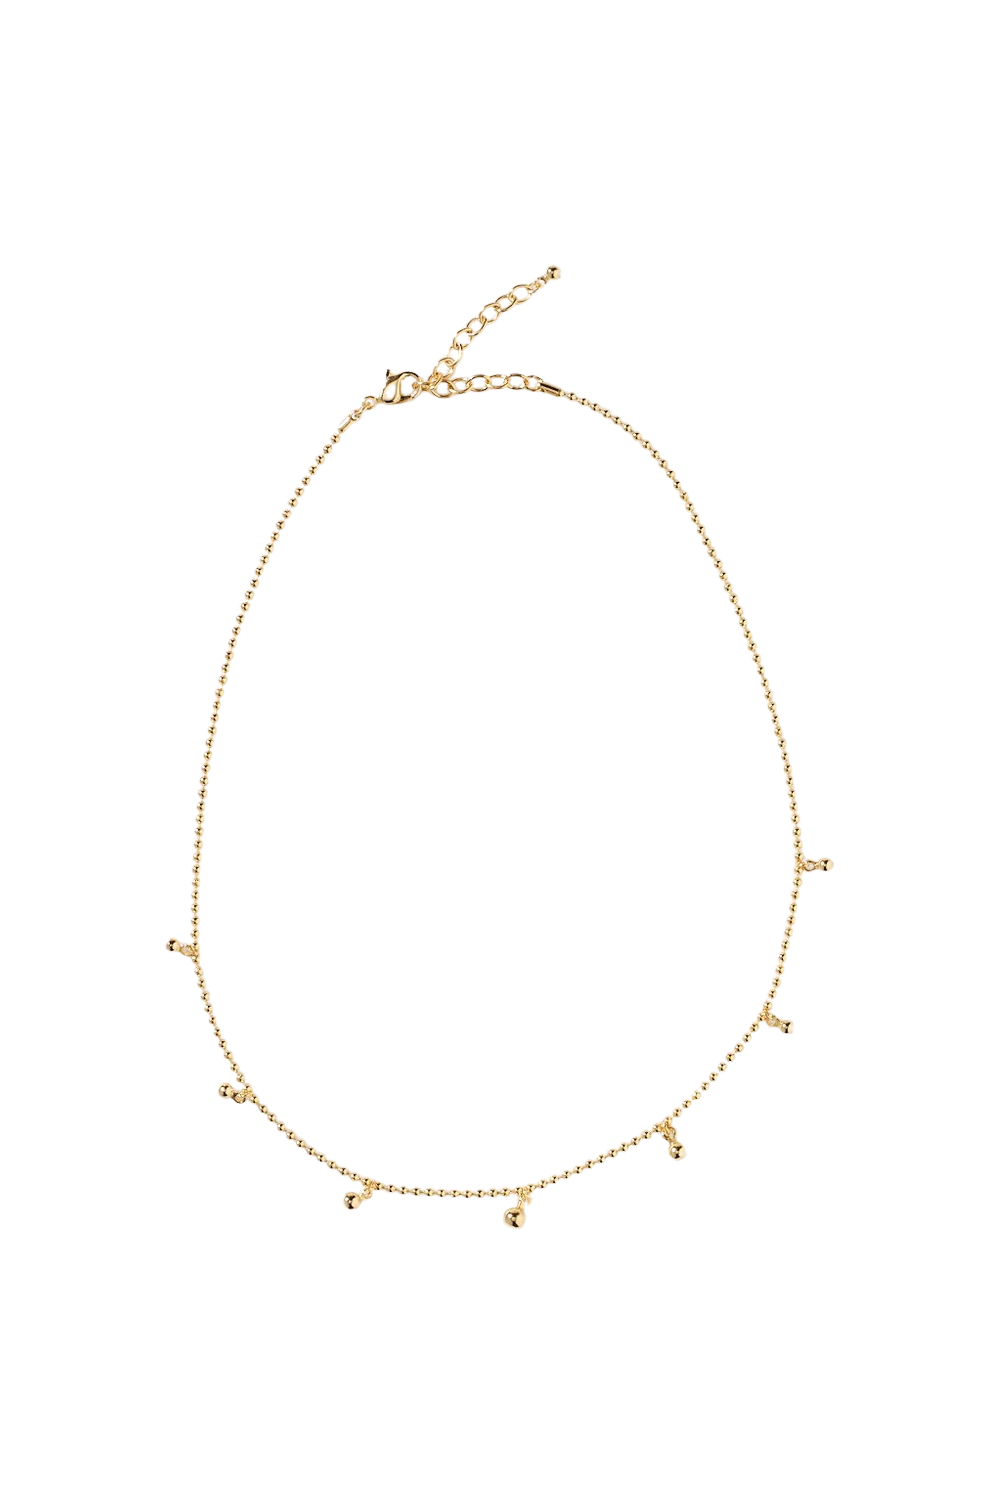 Steph Shaker Necklace - Gold